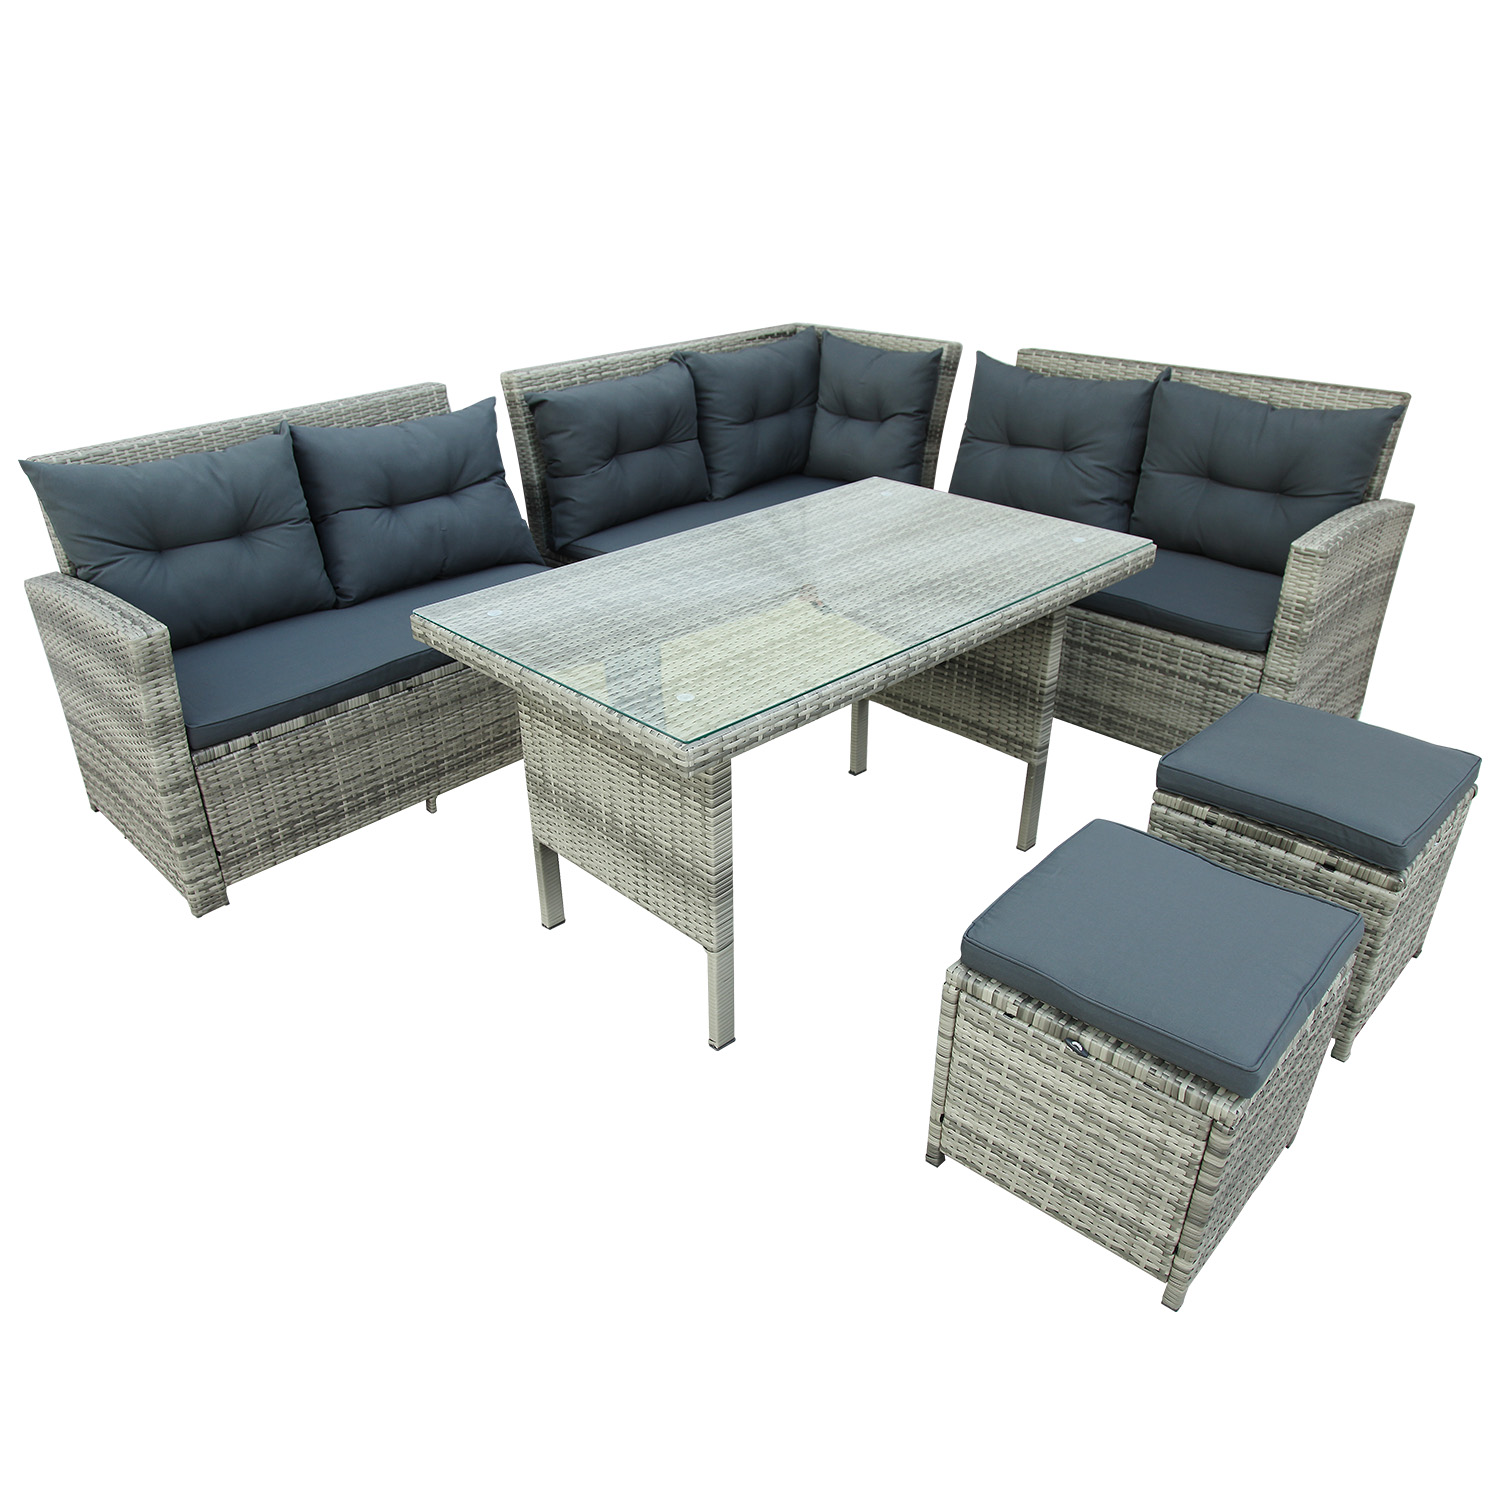  6-Piece Patio Furniture Set Outdoor Sectional Sofa with Glass Table, Ottomans for Pool, Backyard, Lawn (Gray)-CASAINC